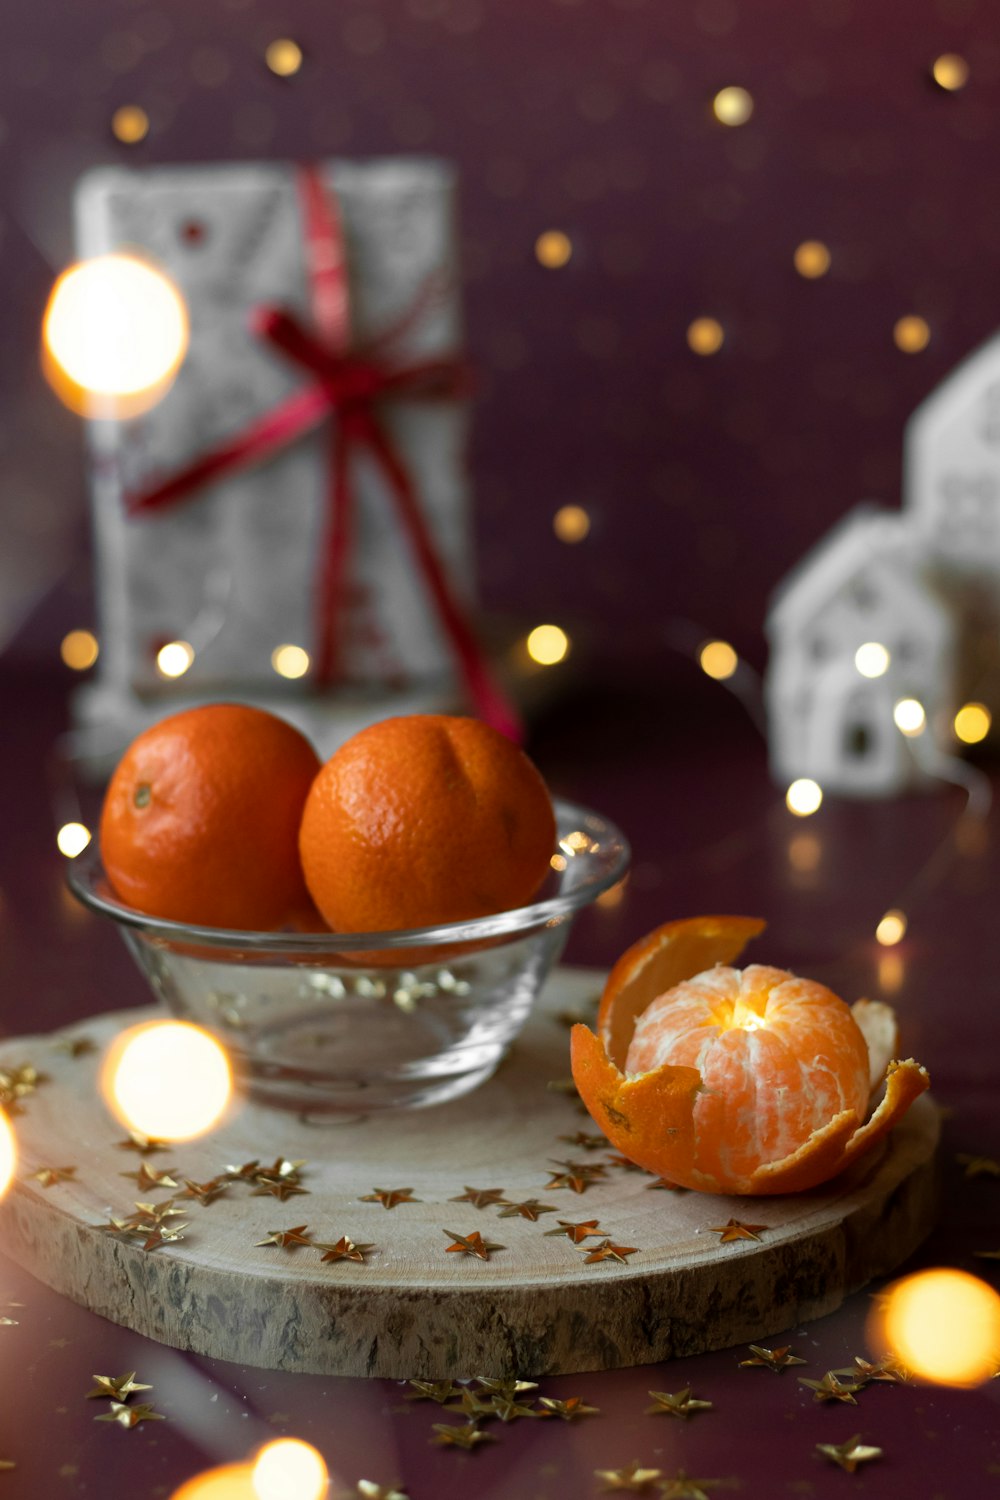 two oranges in a glass bowl on a table